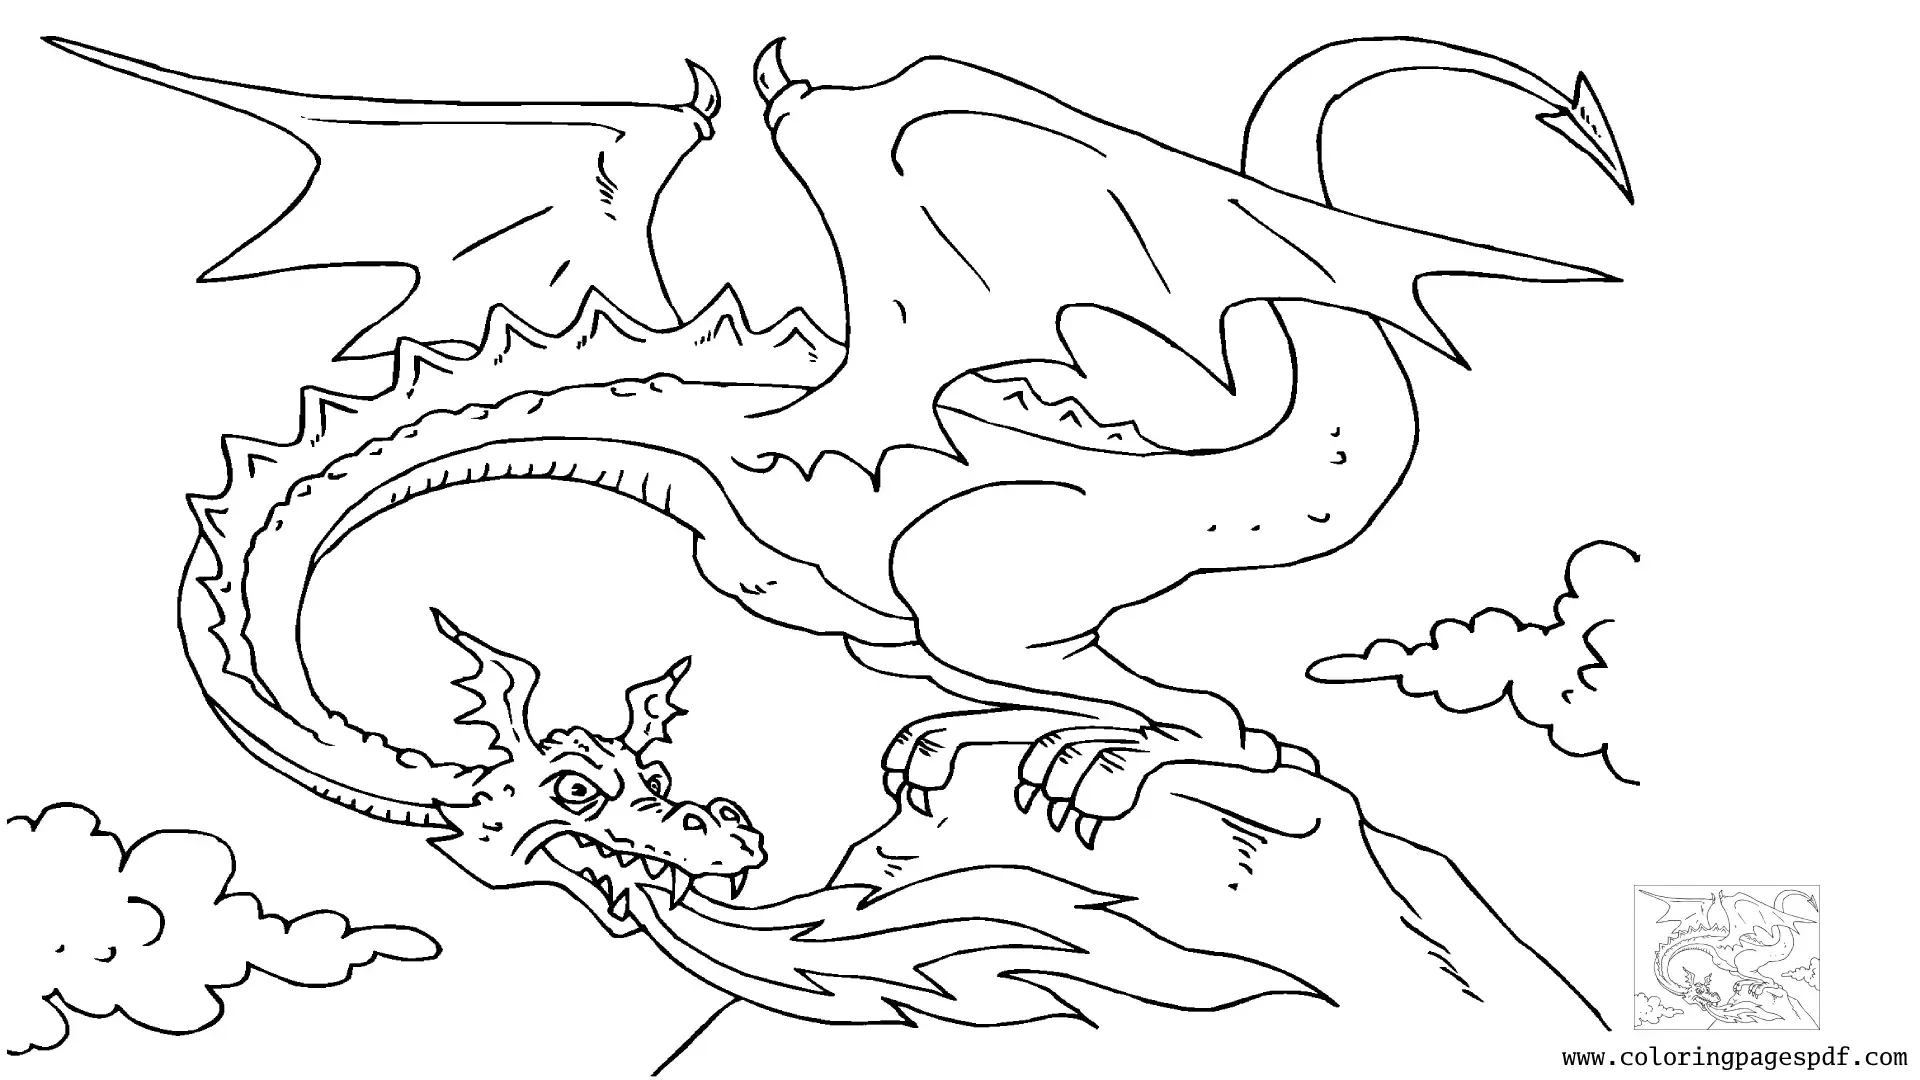 Coloring Page Of A Dragon Breathing Fire